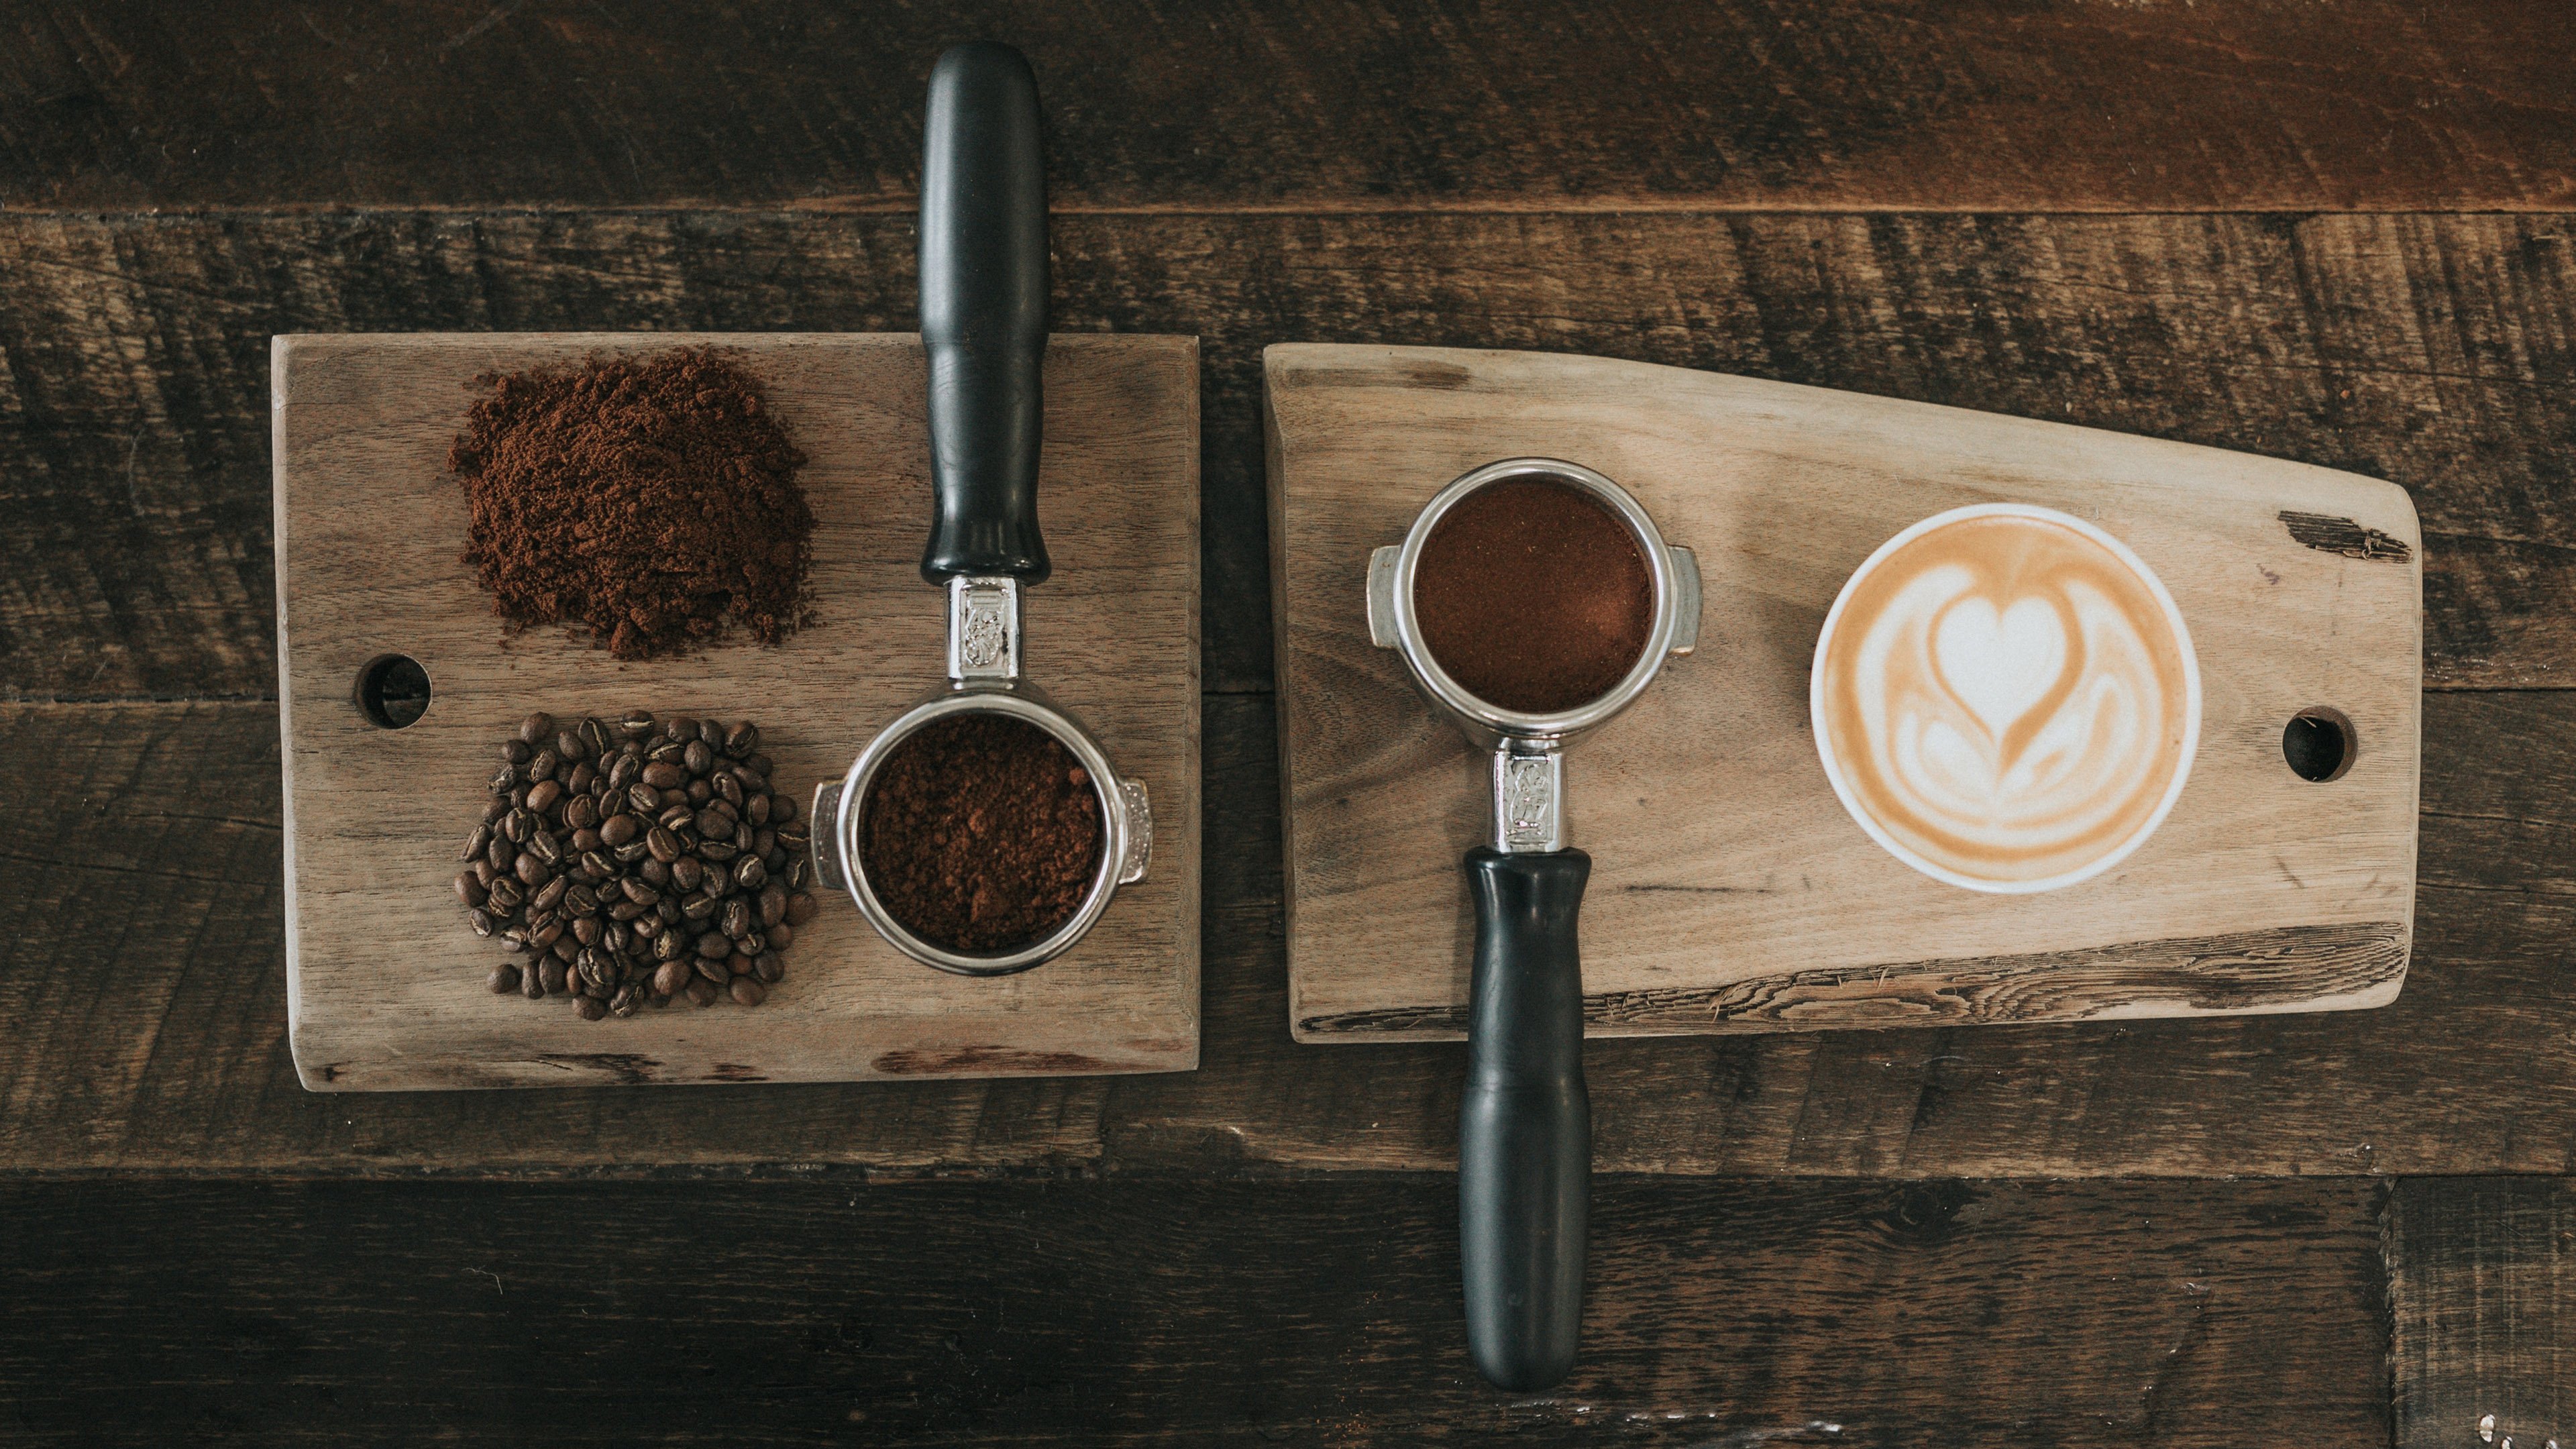 coffee, Coffee beans, Latte, Latte art, Wooden surface, Wood, Texture, Ground coffee beans Wallpaper